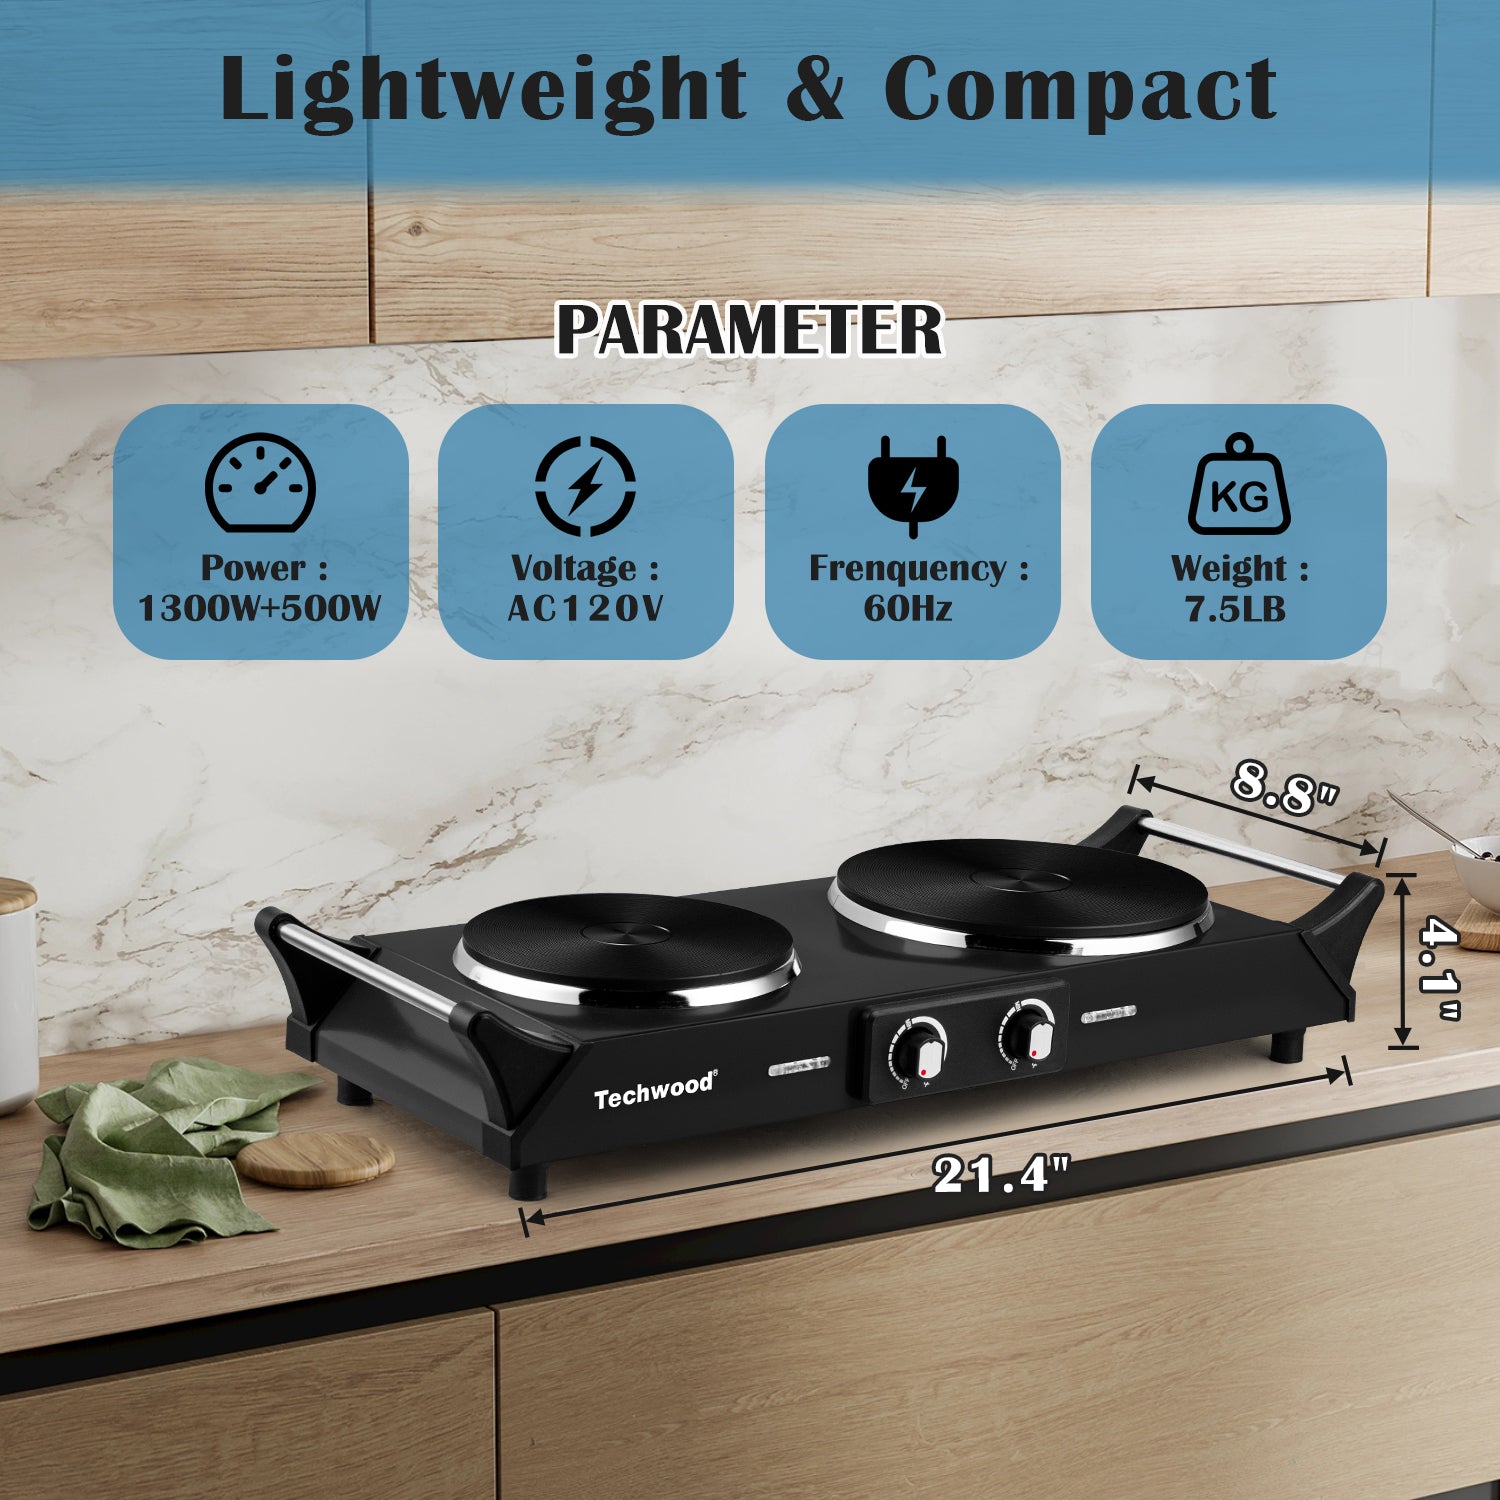 Hot Plate, Techwood 1800W Dual Electric Stove, Countertop Stove Double  Burner for Cooking, Infrared Ceramic Hot Plates Double Cooktop, Brushed